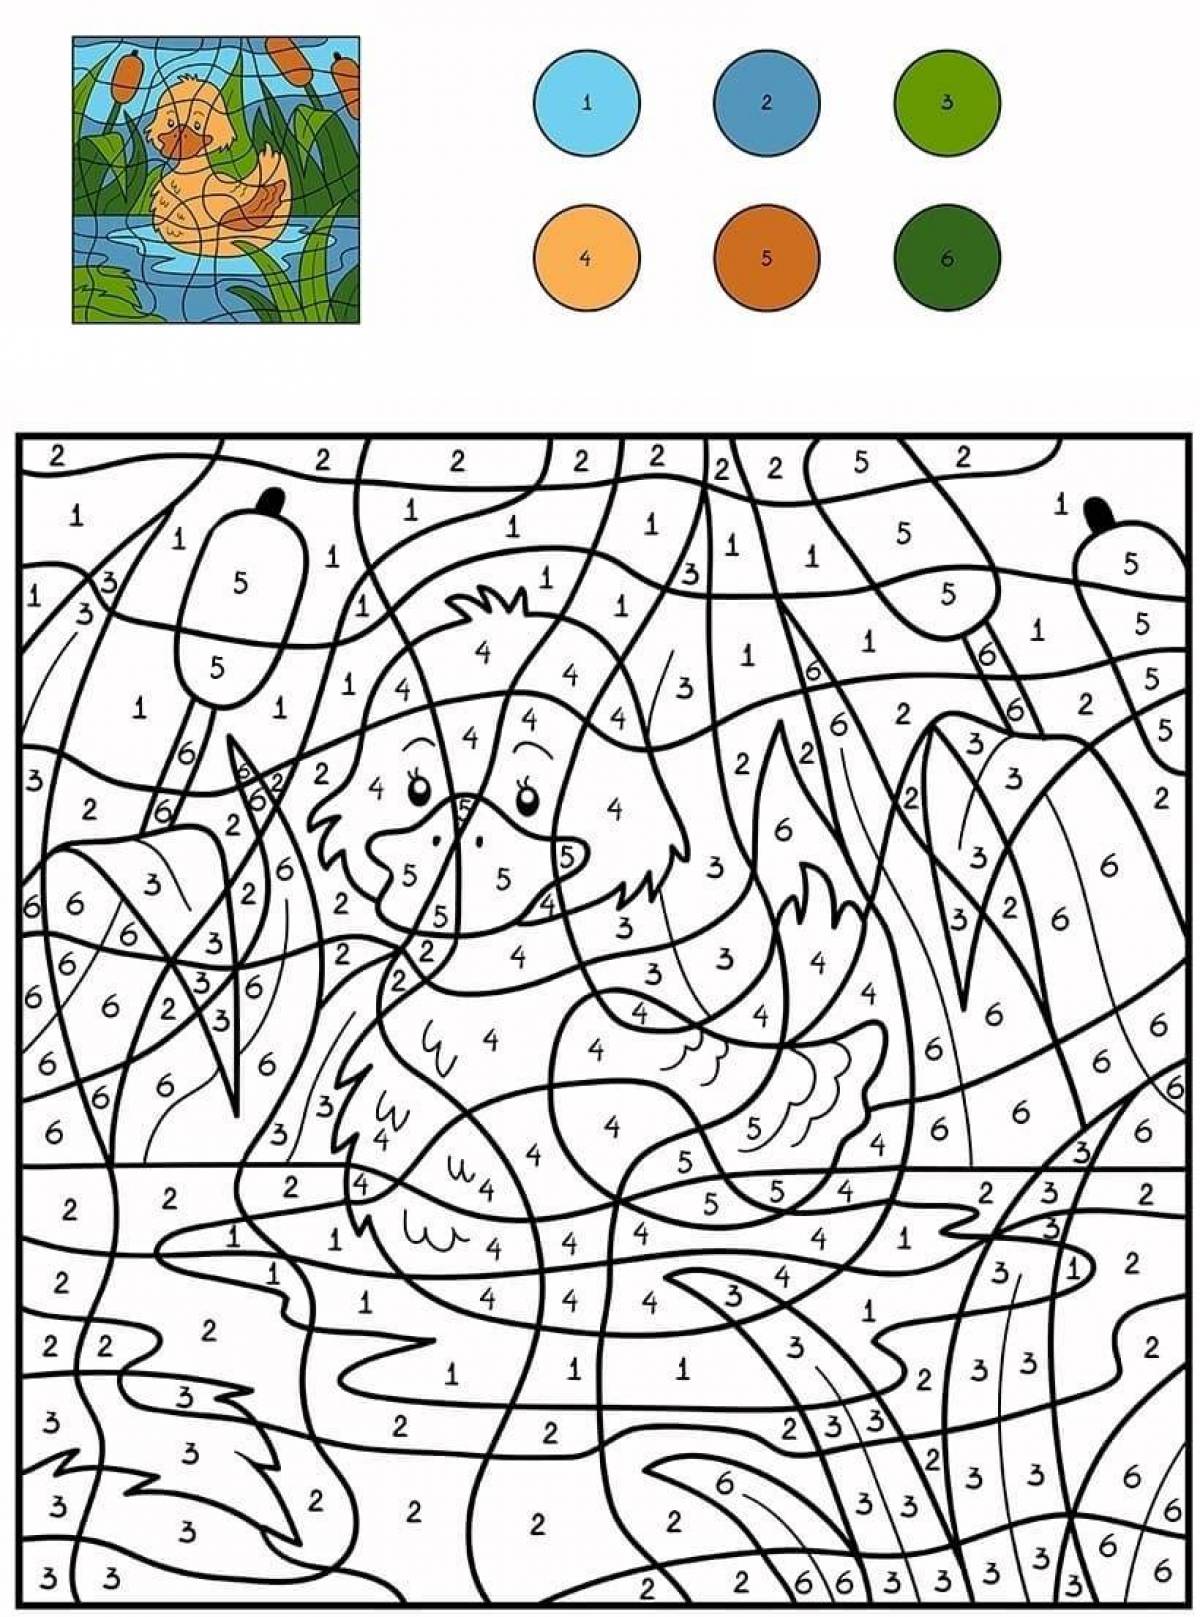 Bright coloring game color game with numbers